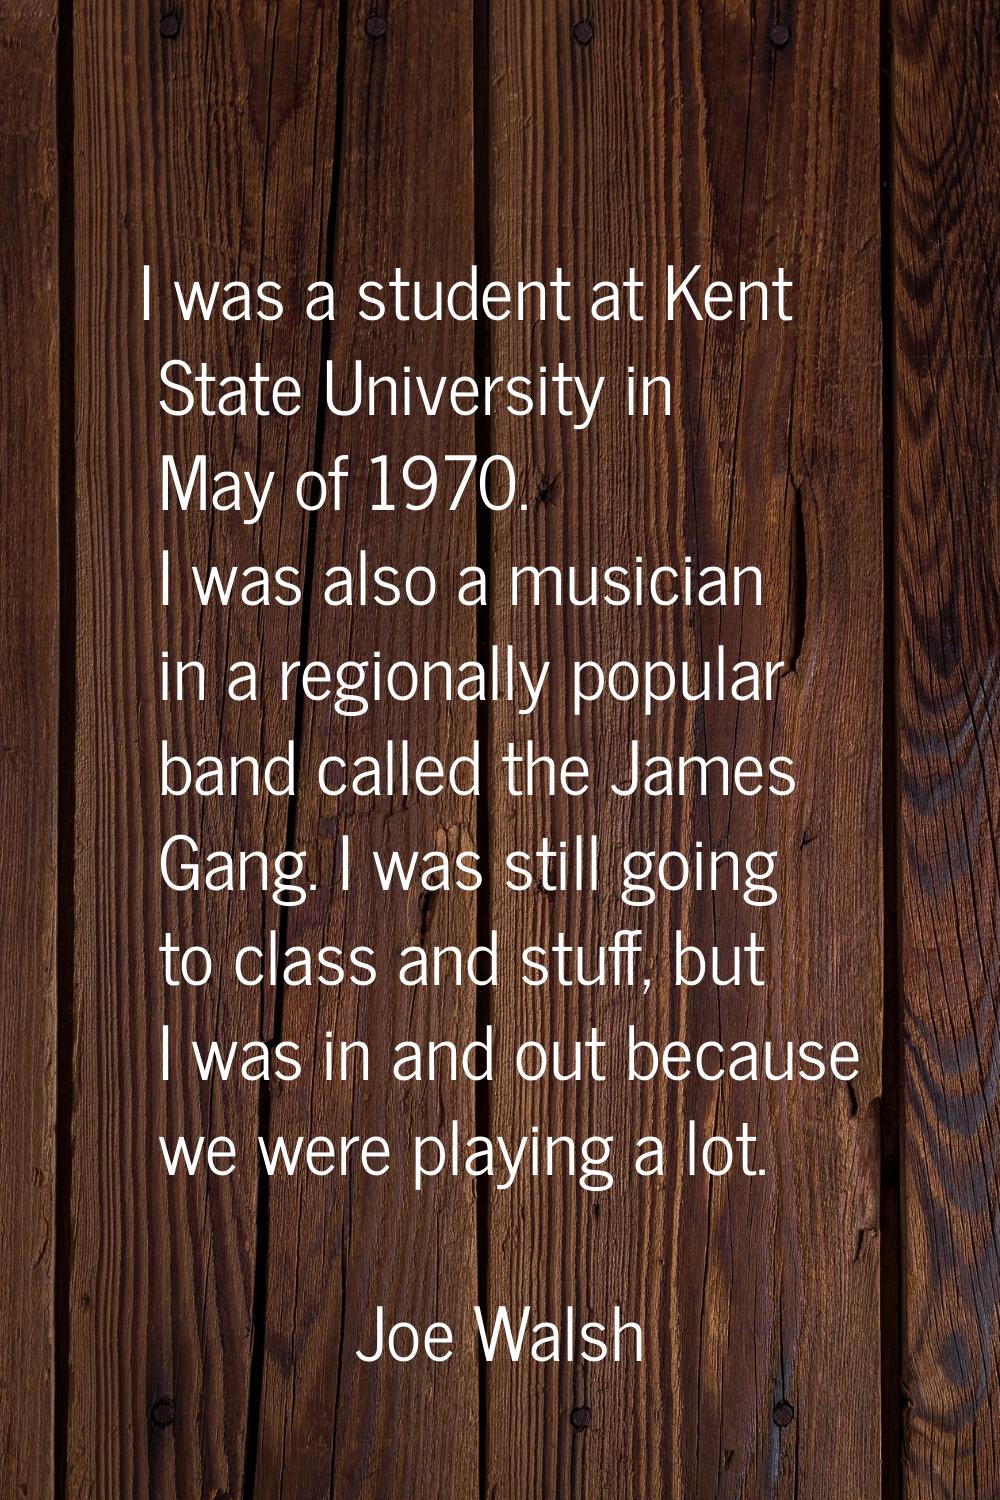 I was a student at Kent State University in May of 1970. I was also a musician in a regionally popu